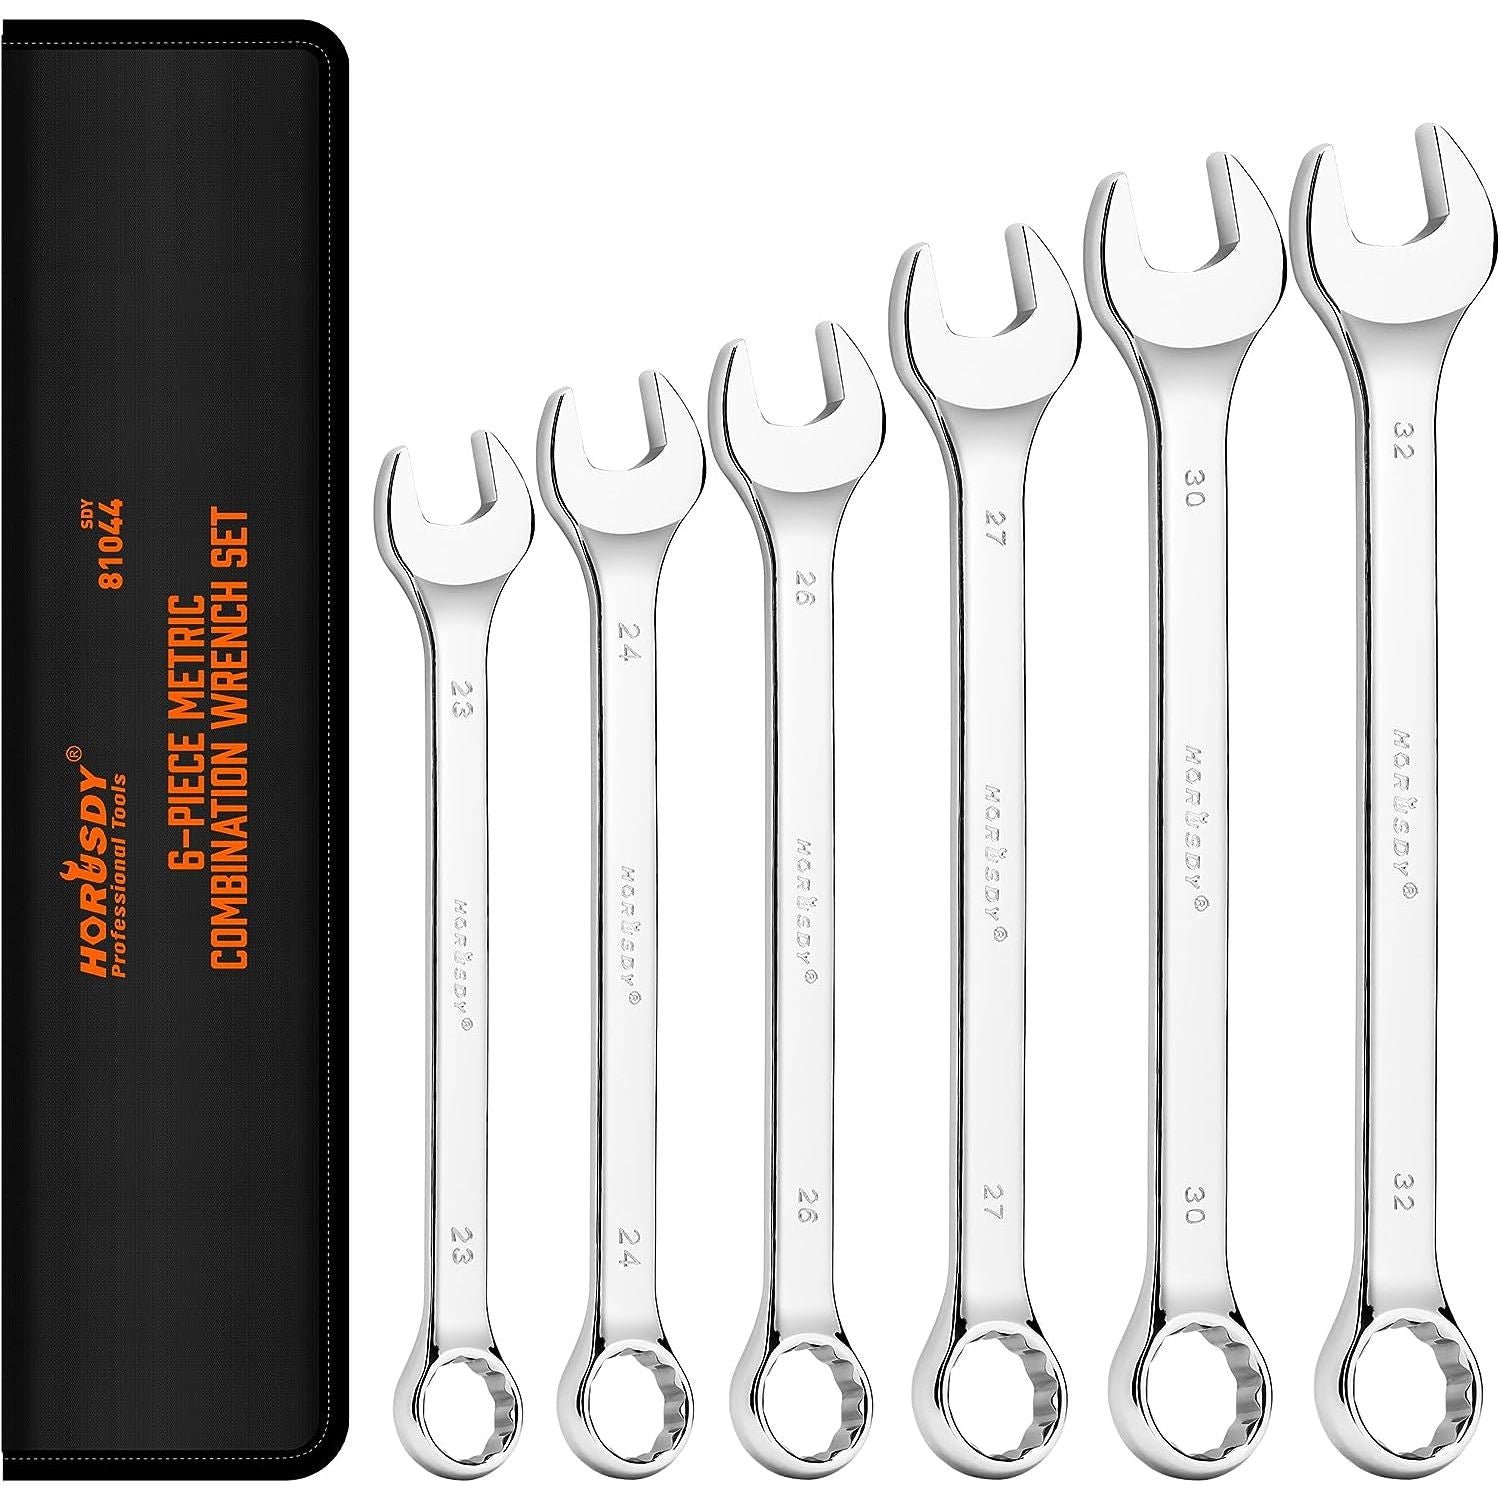 Large Metric Wrench 6 Piece Set | 12 Point | 23mm, 24mm, 26mm, 27mm, 30mm, 32mm - South East Clearance Centre